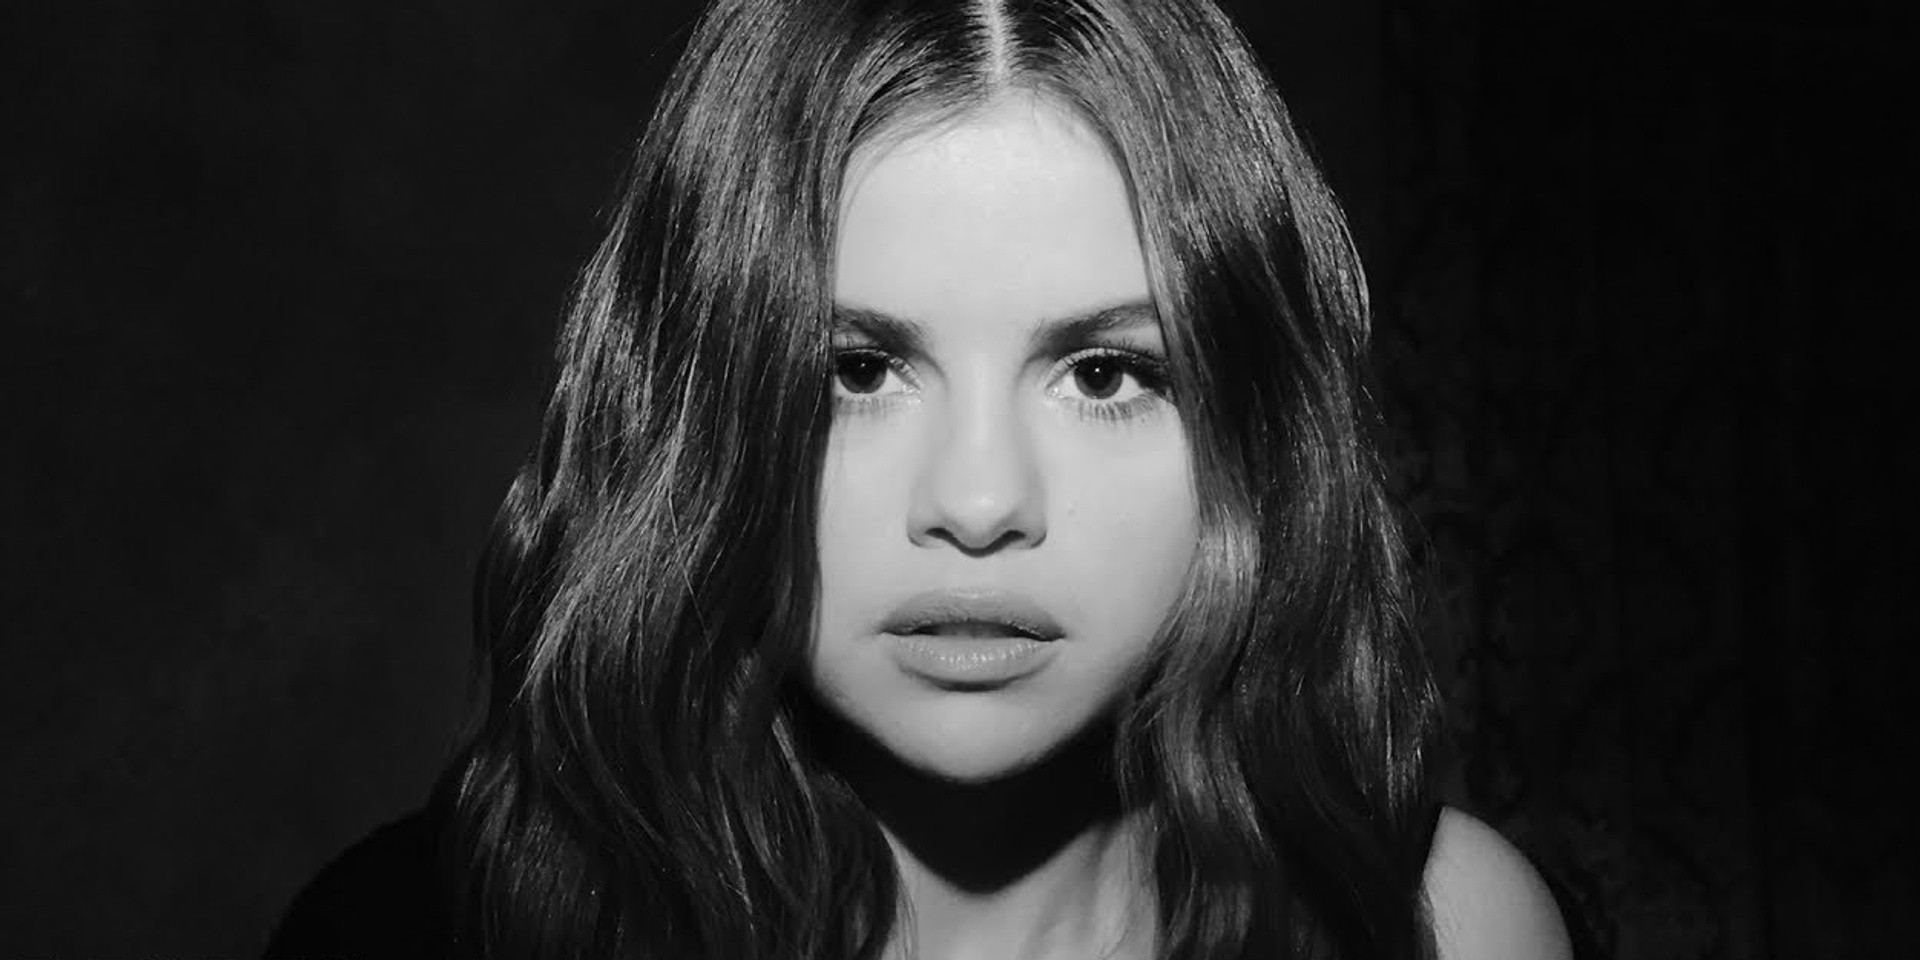 Selena Gomez releases new single 'Lose You to Love Me'